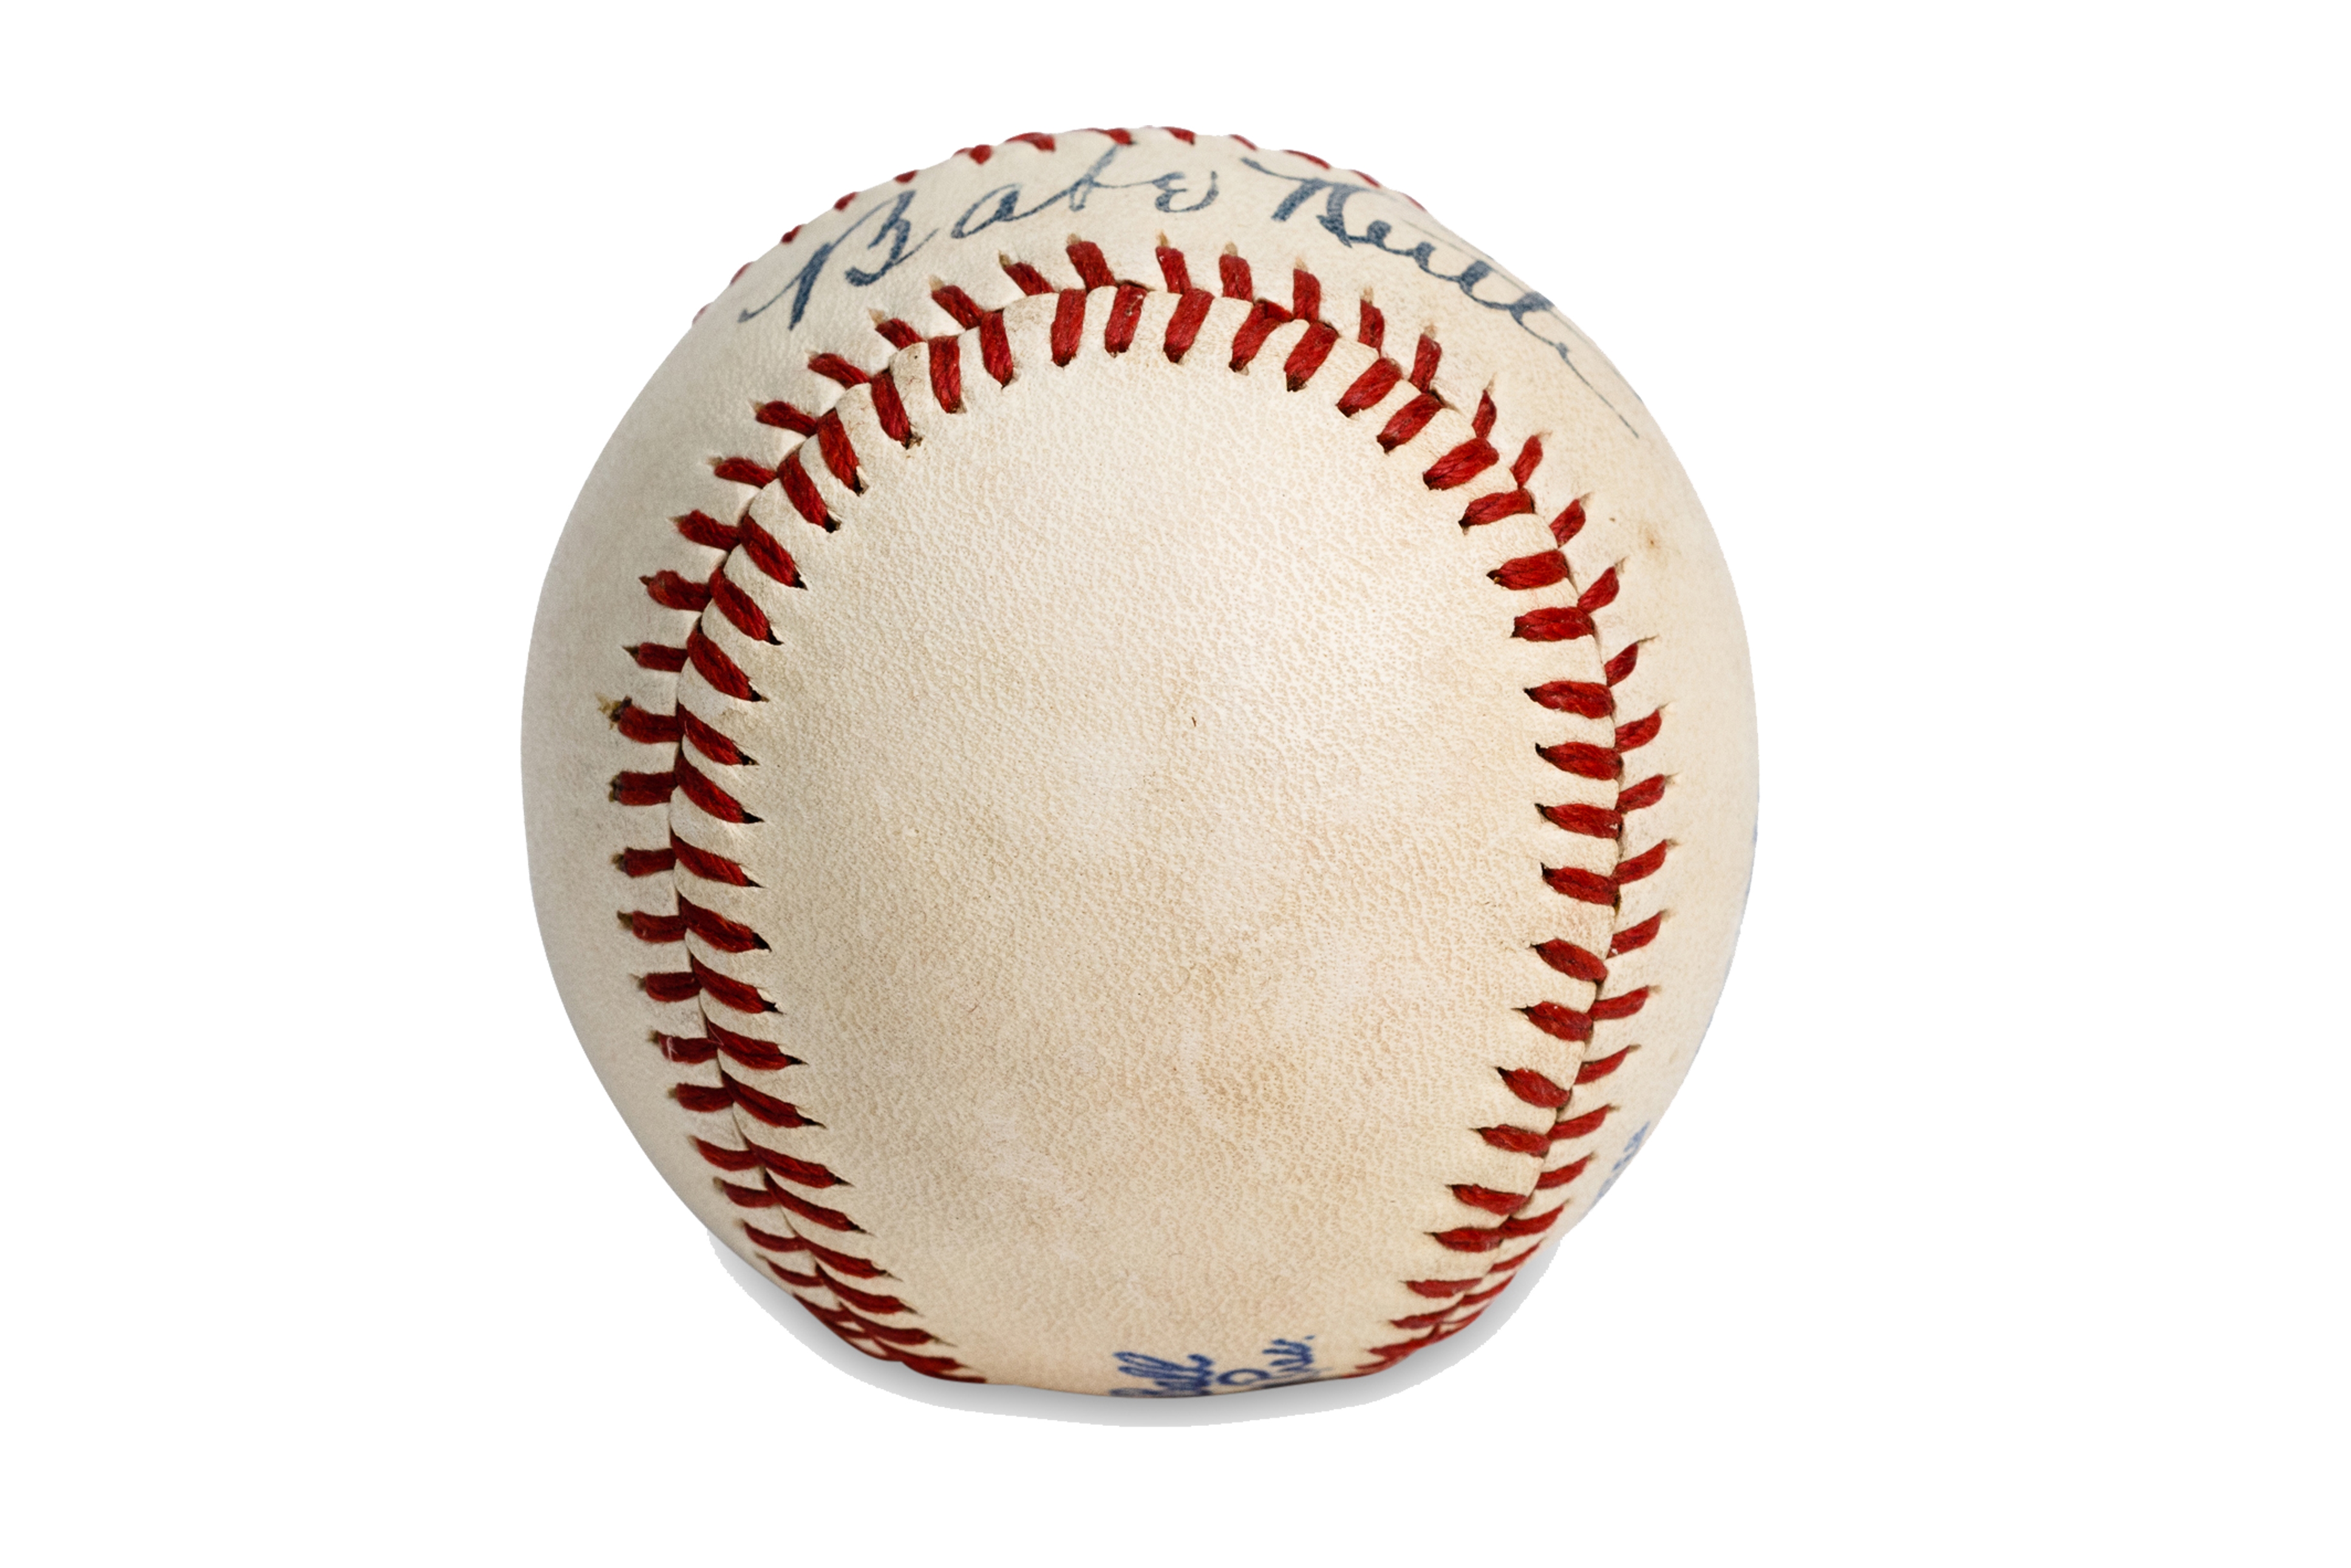 Babe Ruth-signed baseball sells for world-record $183,500